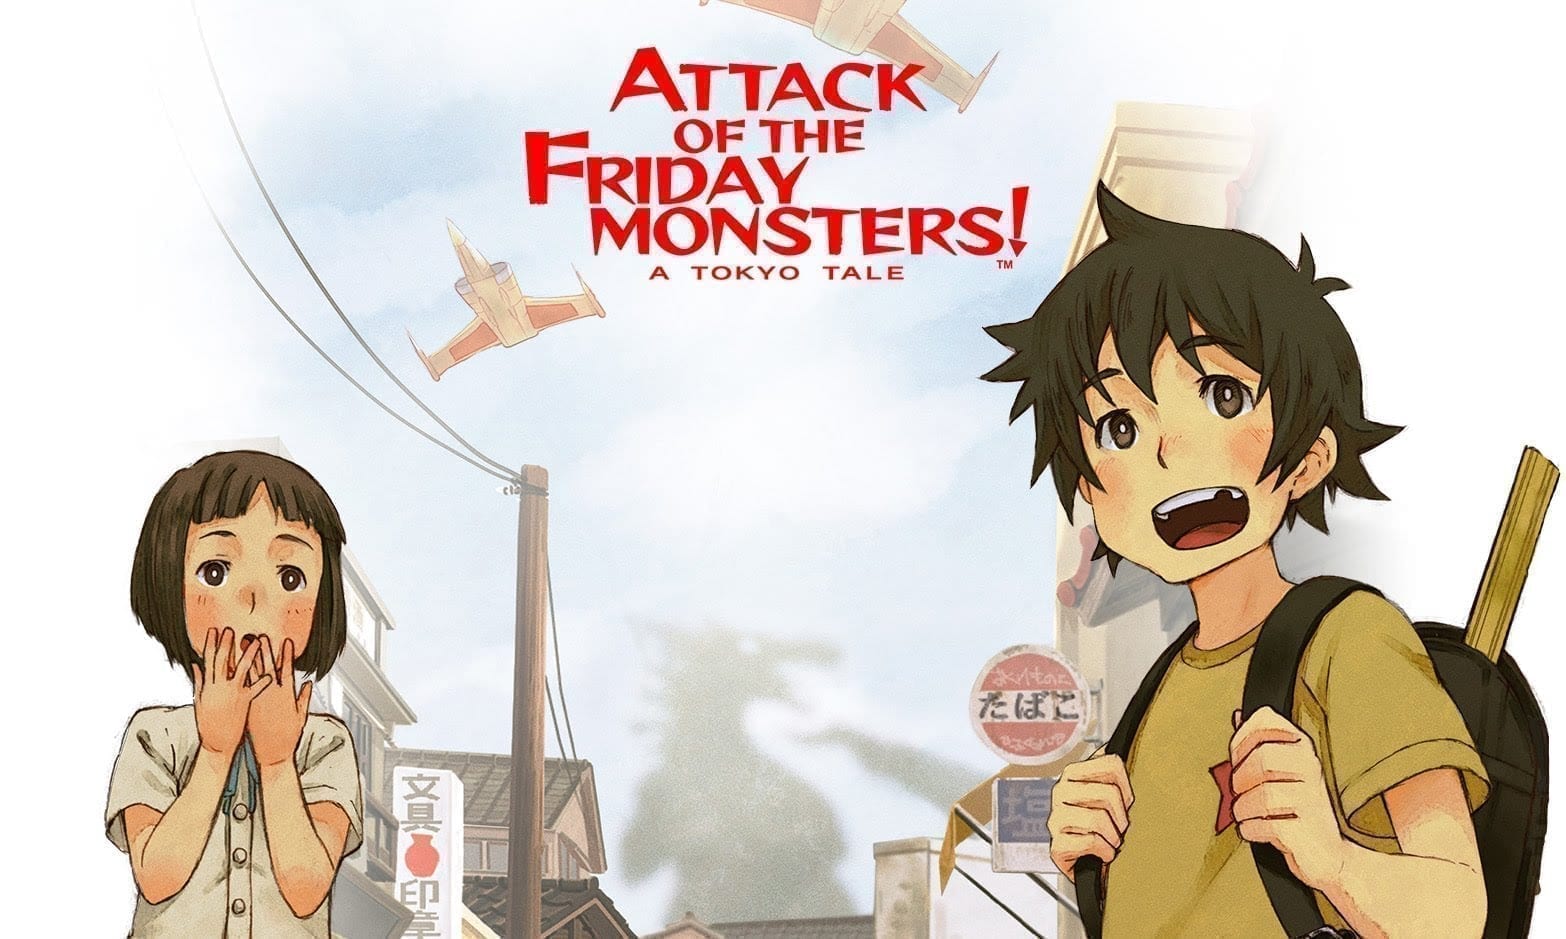 [Recenzja] Attack of the Friday Monsters – A Tokyo Tale!